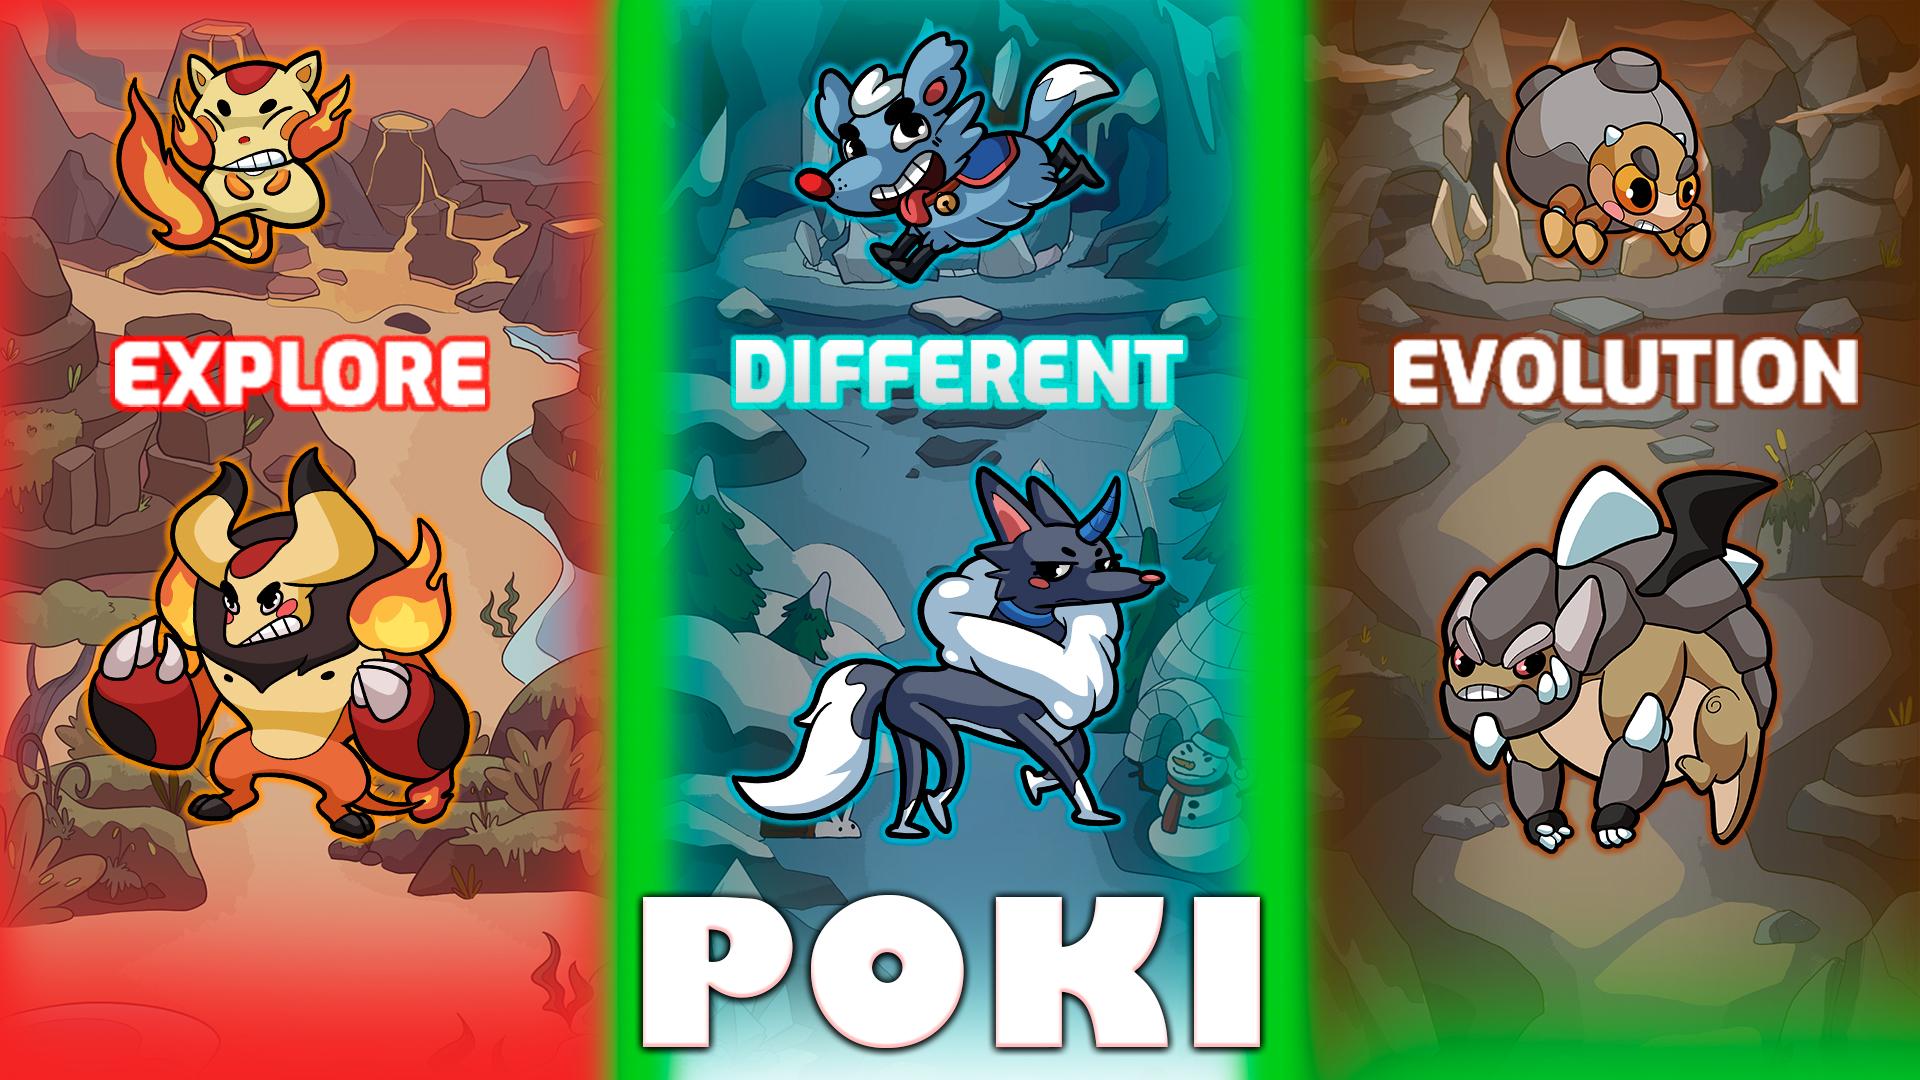 Poki for Android - Free App Download